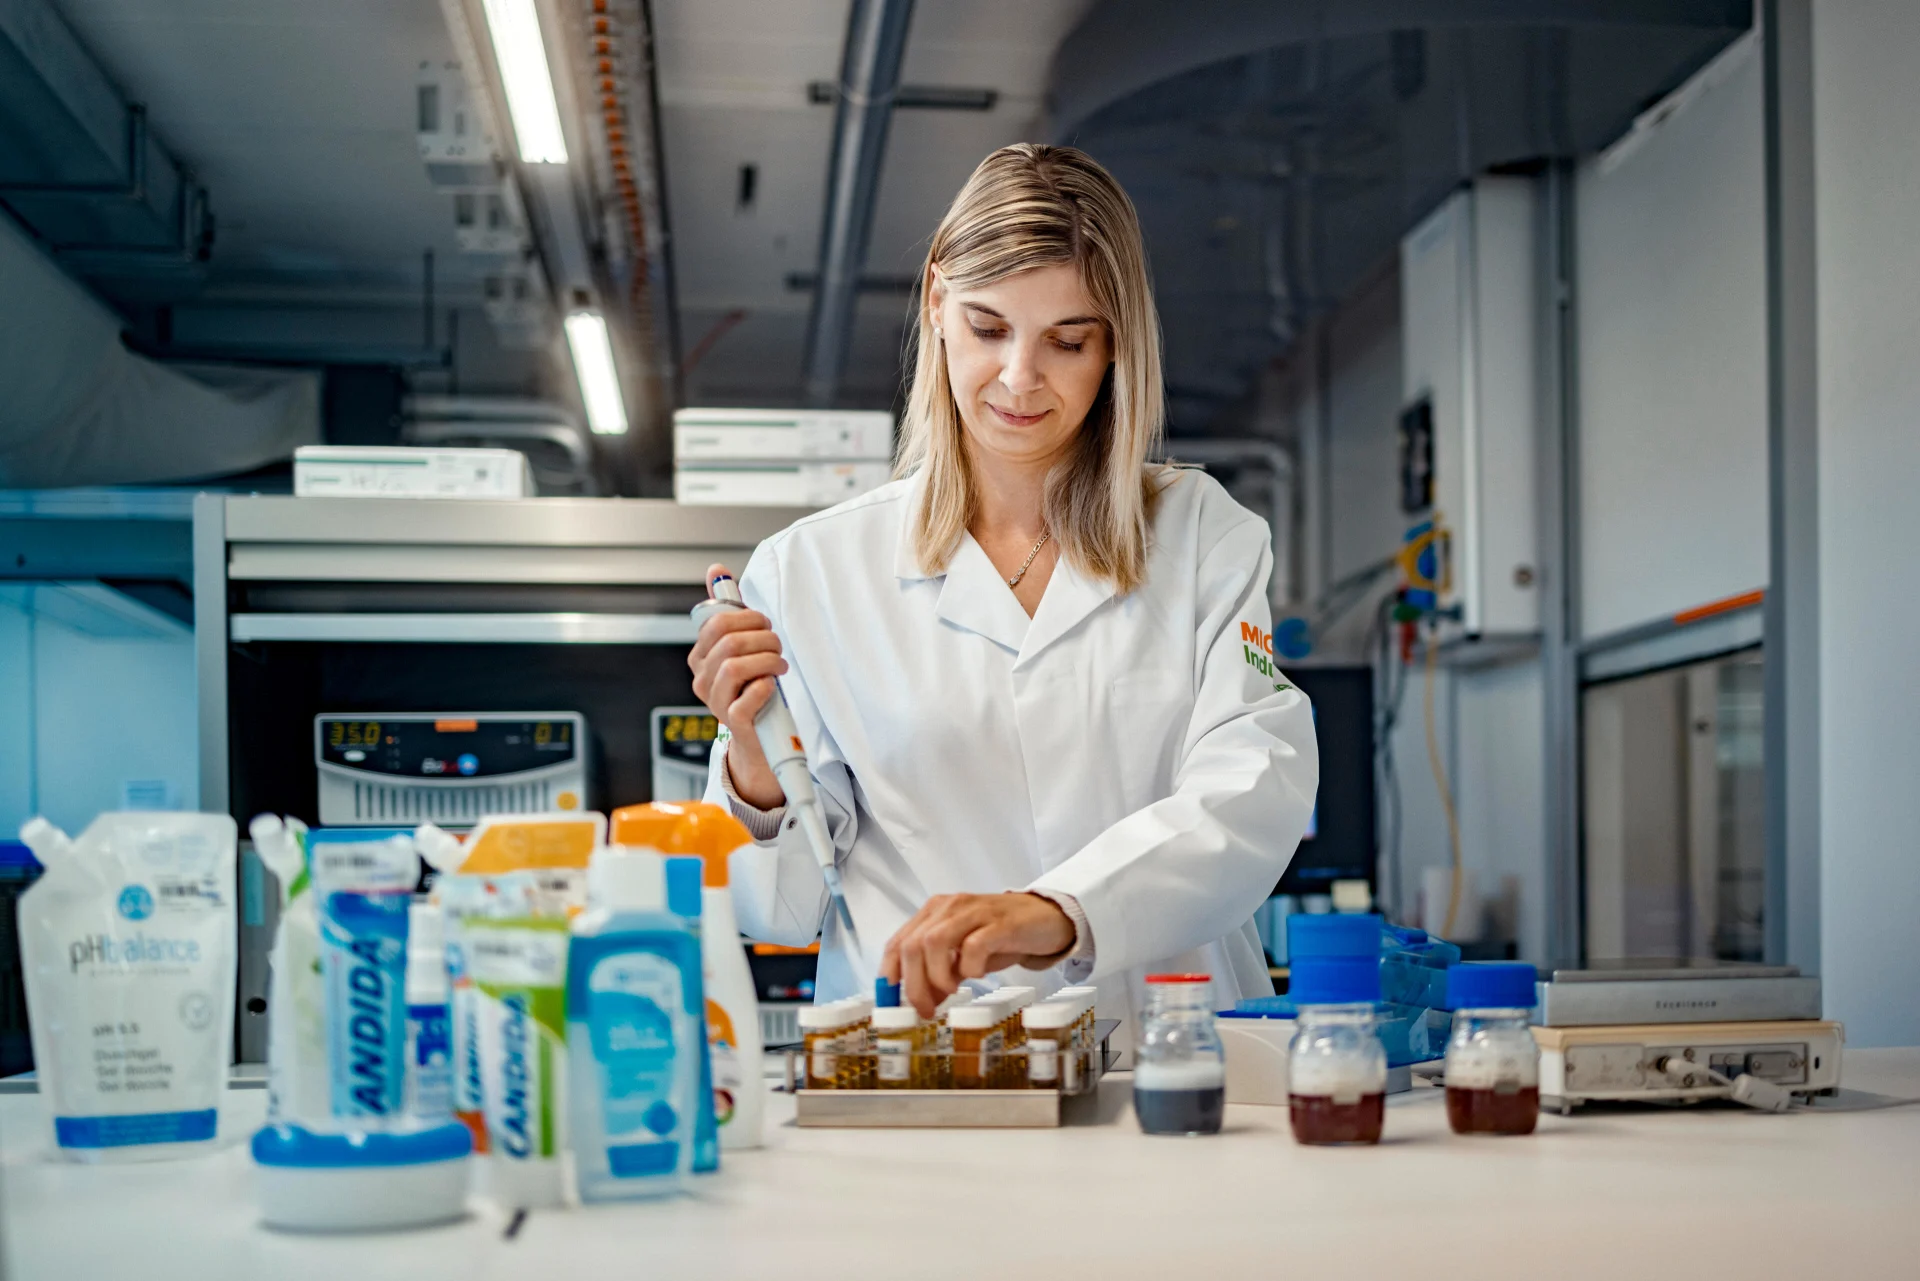 A woman in a white coat stands in a laboratory working, with various Migros products in front of her.